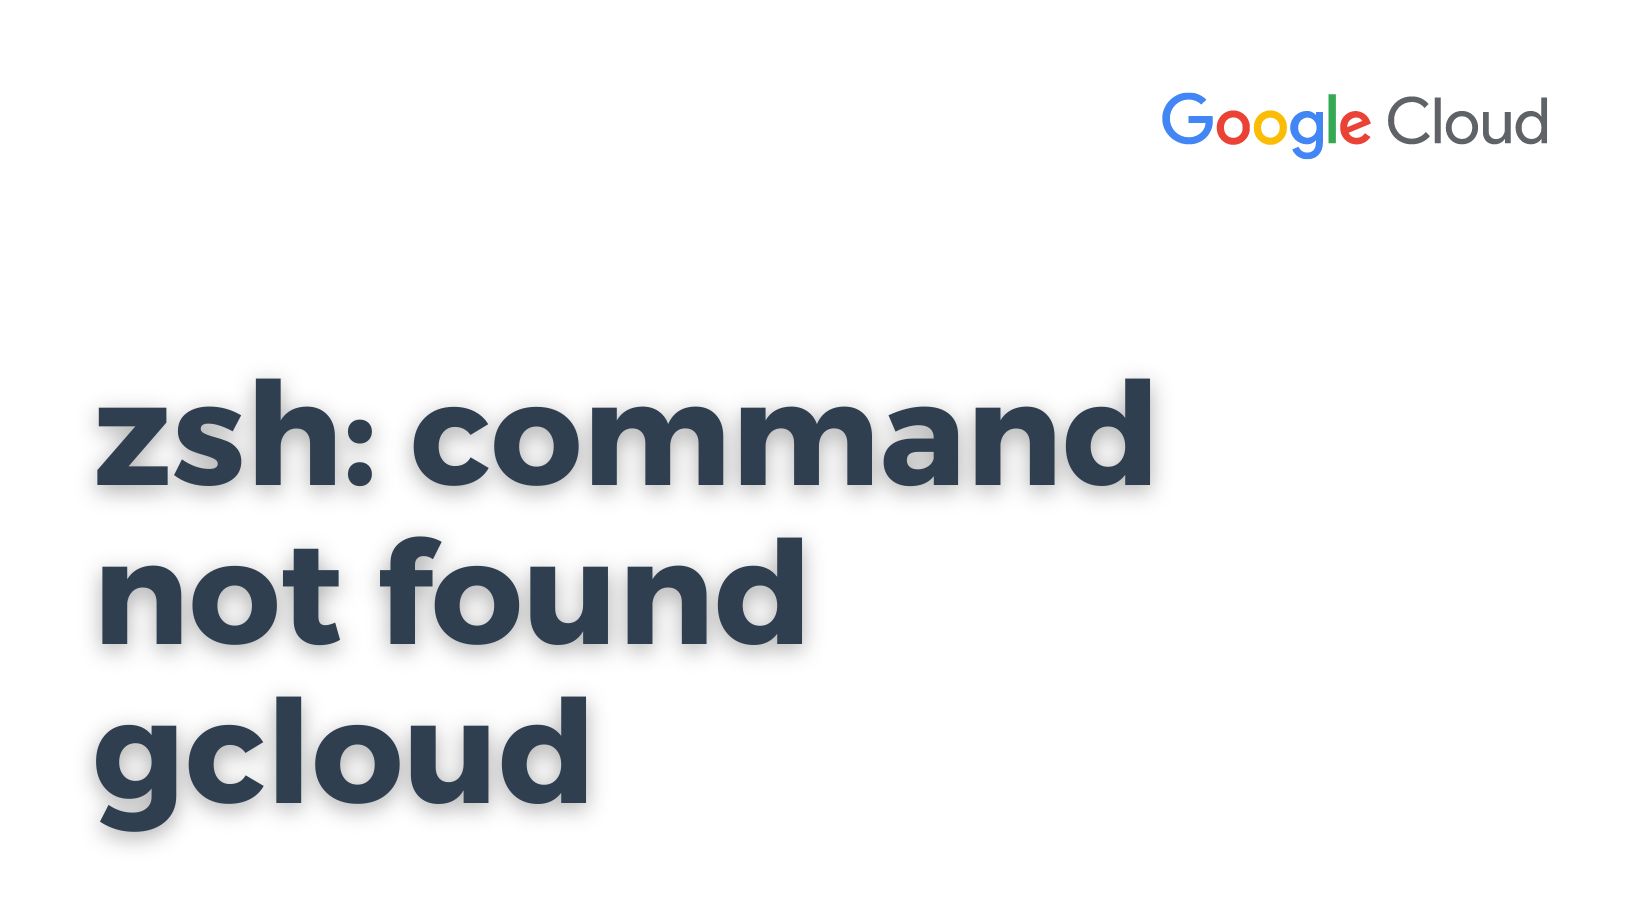 ZSH command not found gcloud